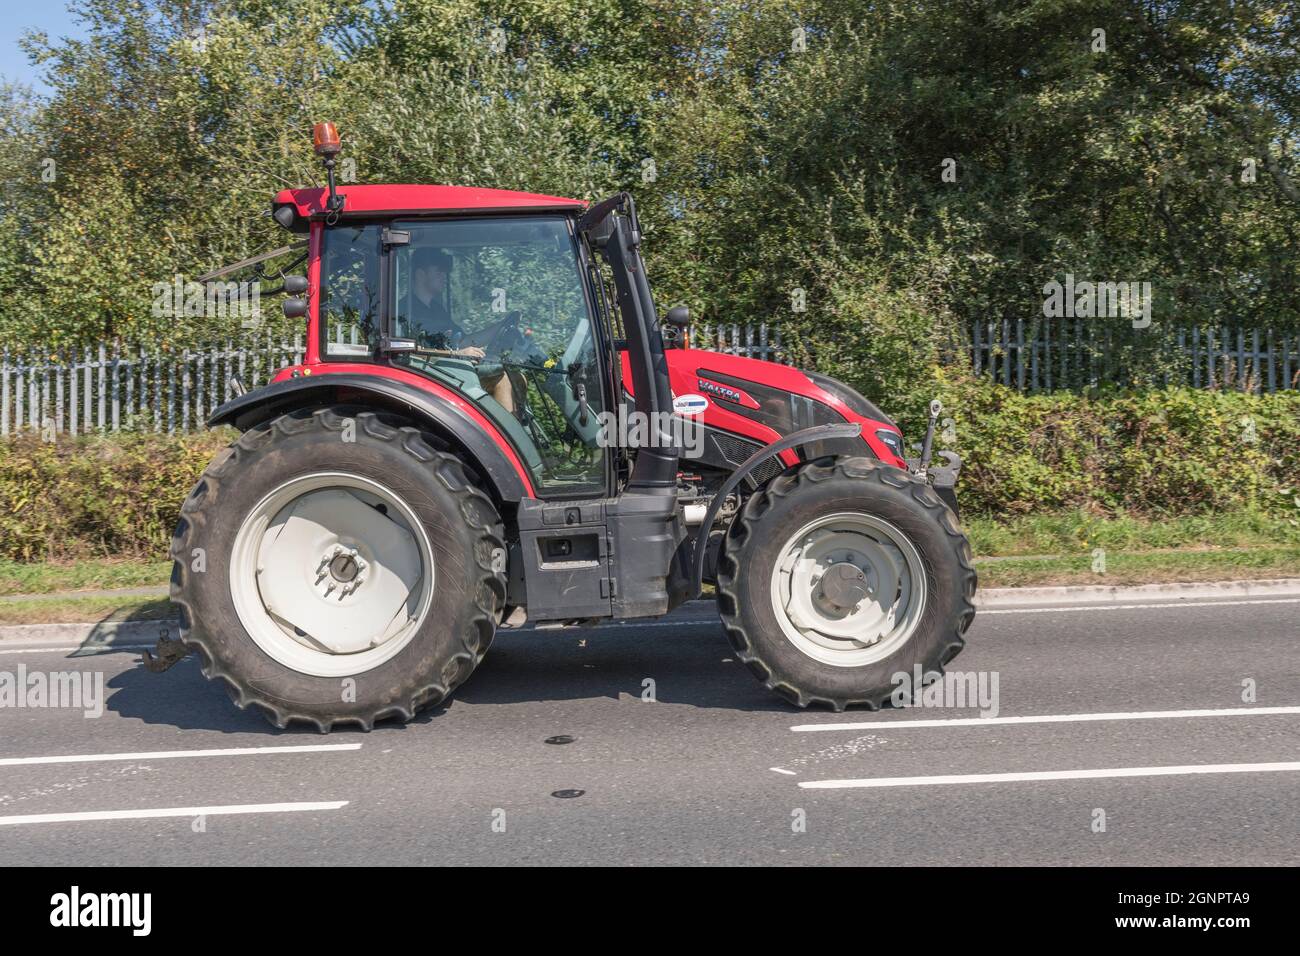 Side profile of red Valtra farm tractor on open uphill rural country road. Valtra is a Finnish tractor brand, this is G Series G136 model. Stock Photo